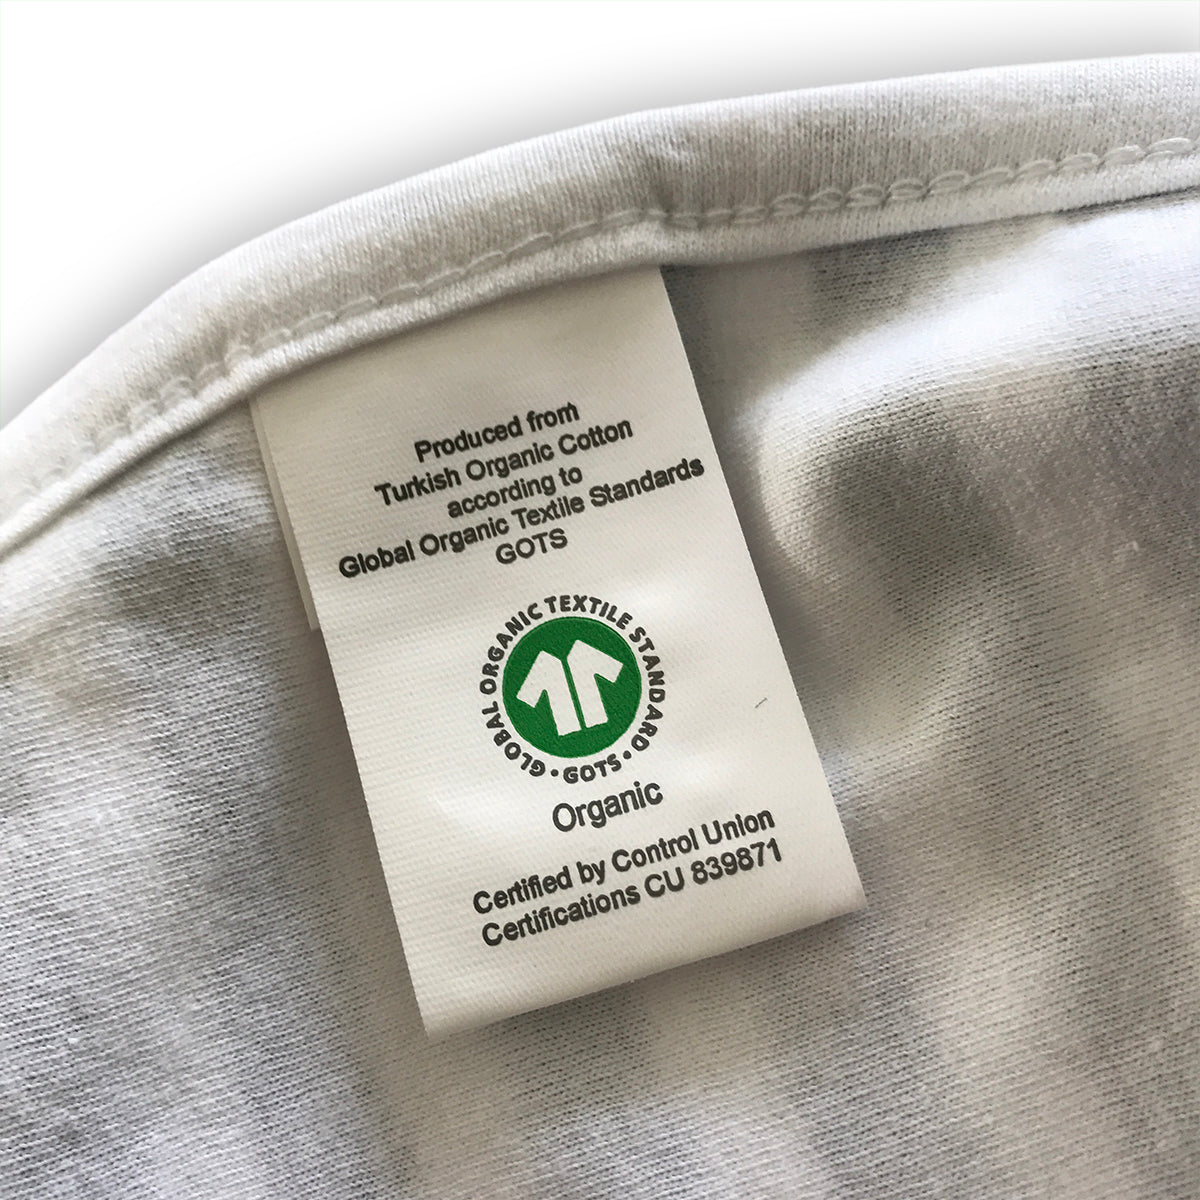 Label stating 'produced from Turkish Organic cotton according to Global Organic Textile Standards'